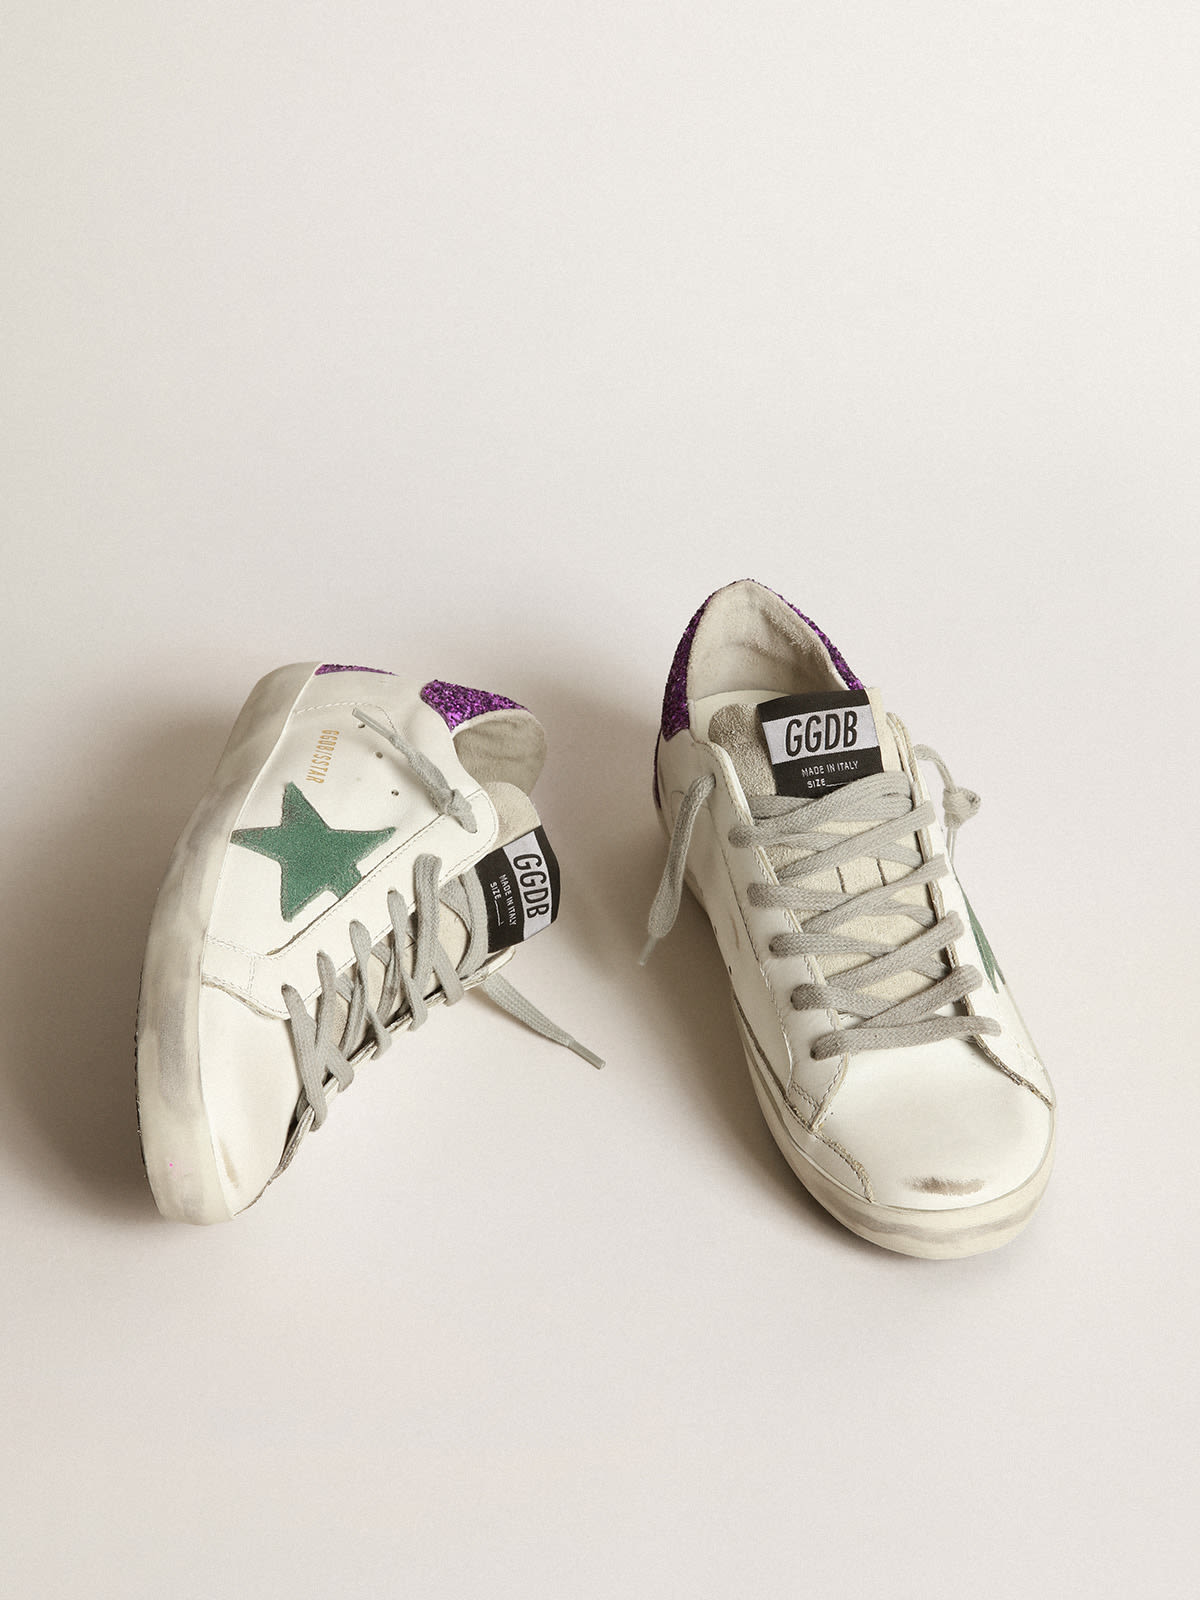 Golden Goose - White Super-Star sneakers with glittery purple rear in 